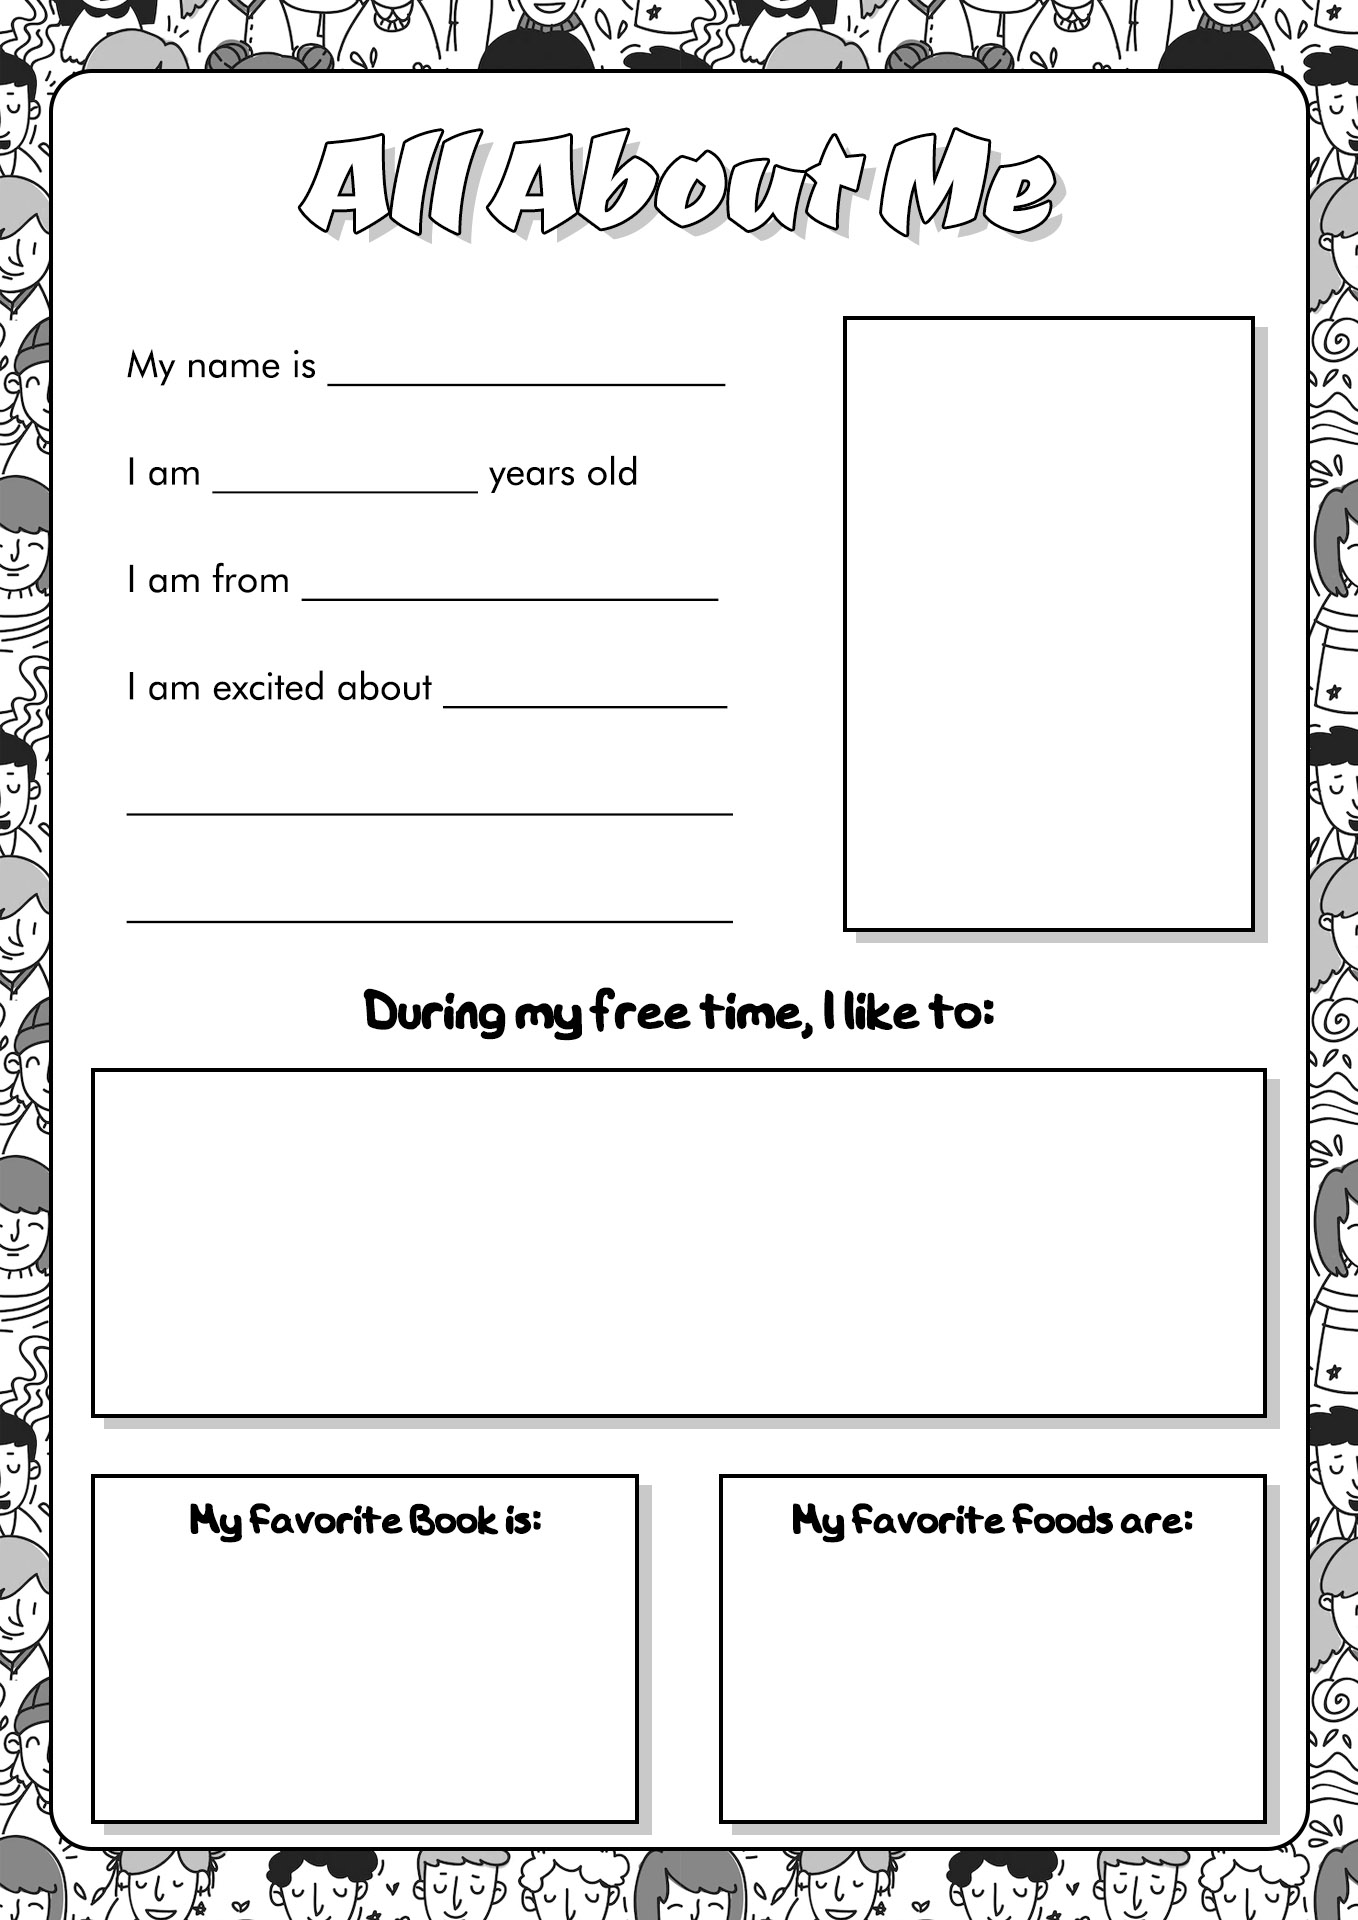 Free Get to Know Me Worksheet Middle School Image